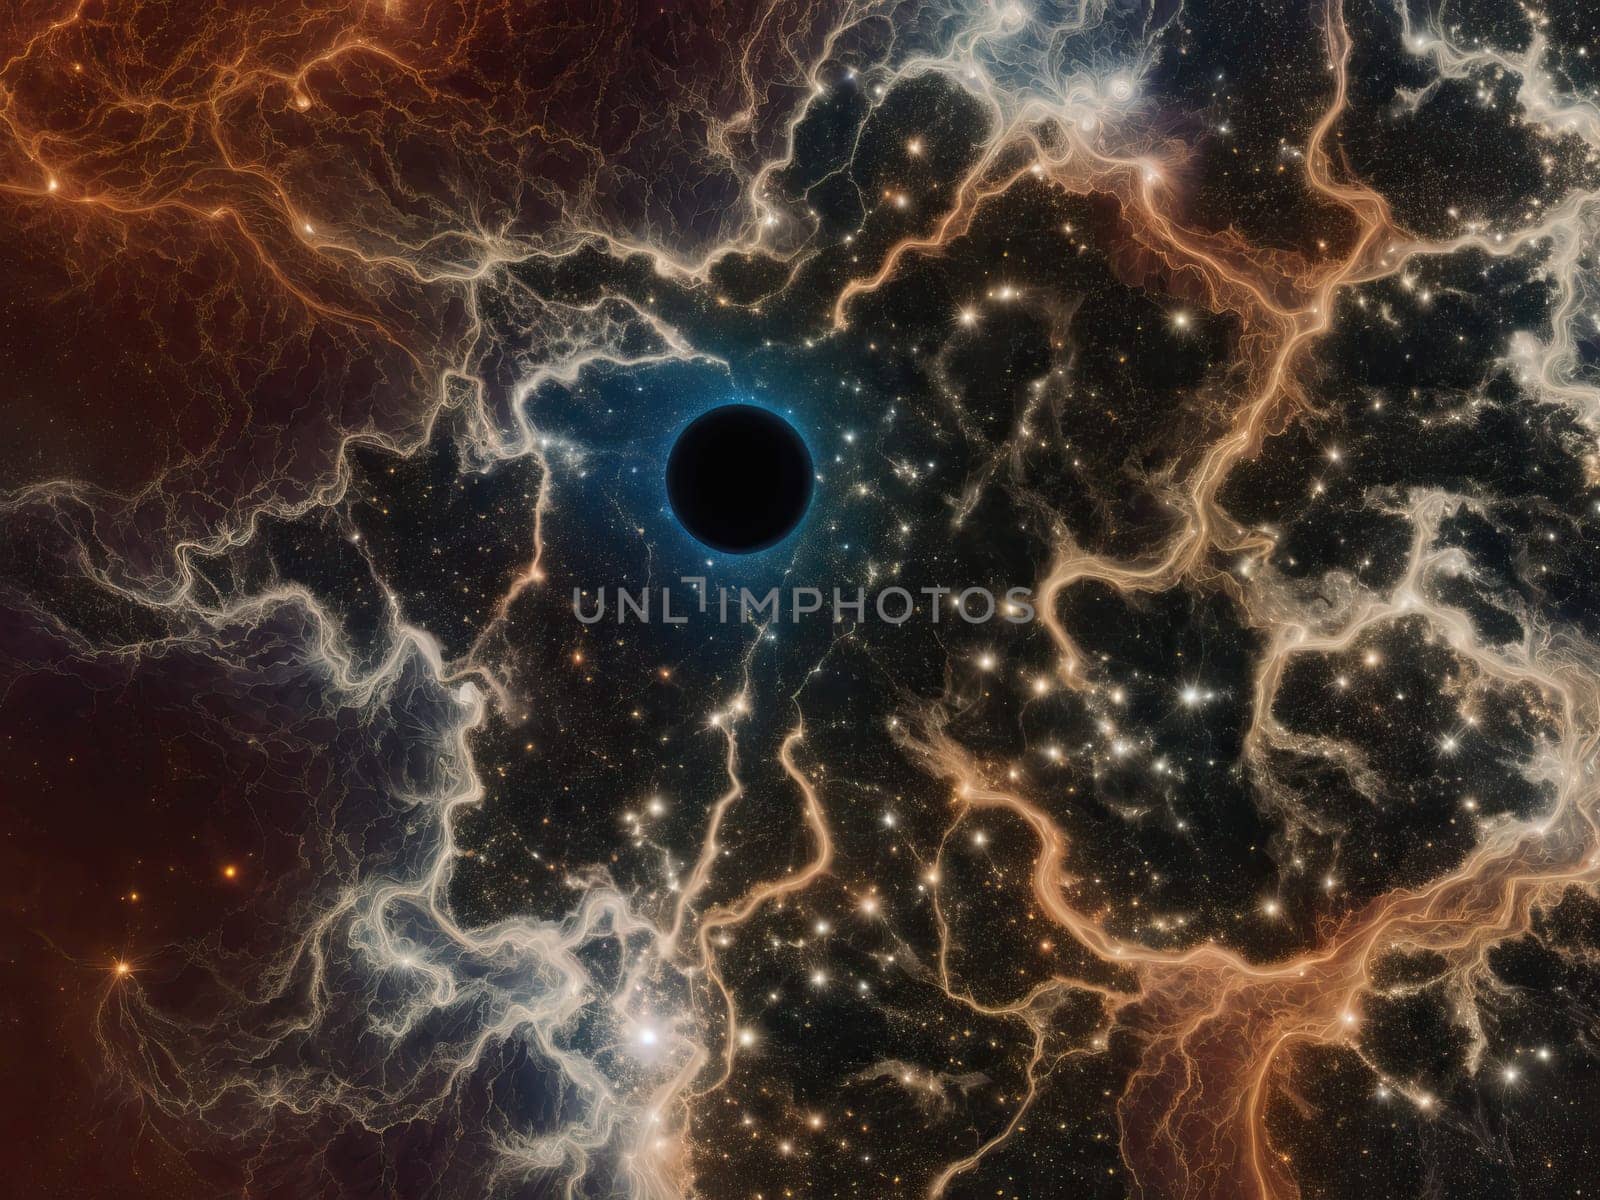 A black hole in space, a colorful fantastic illustration of stars in space. by applesstock